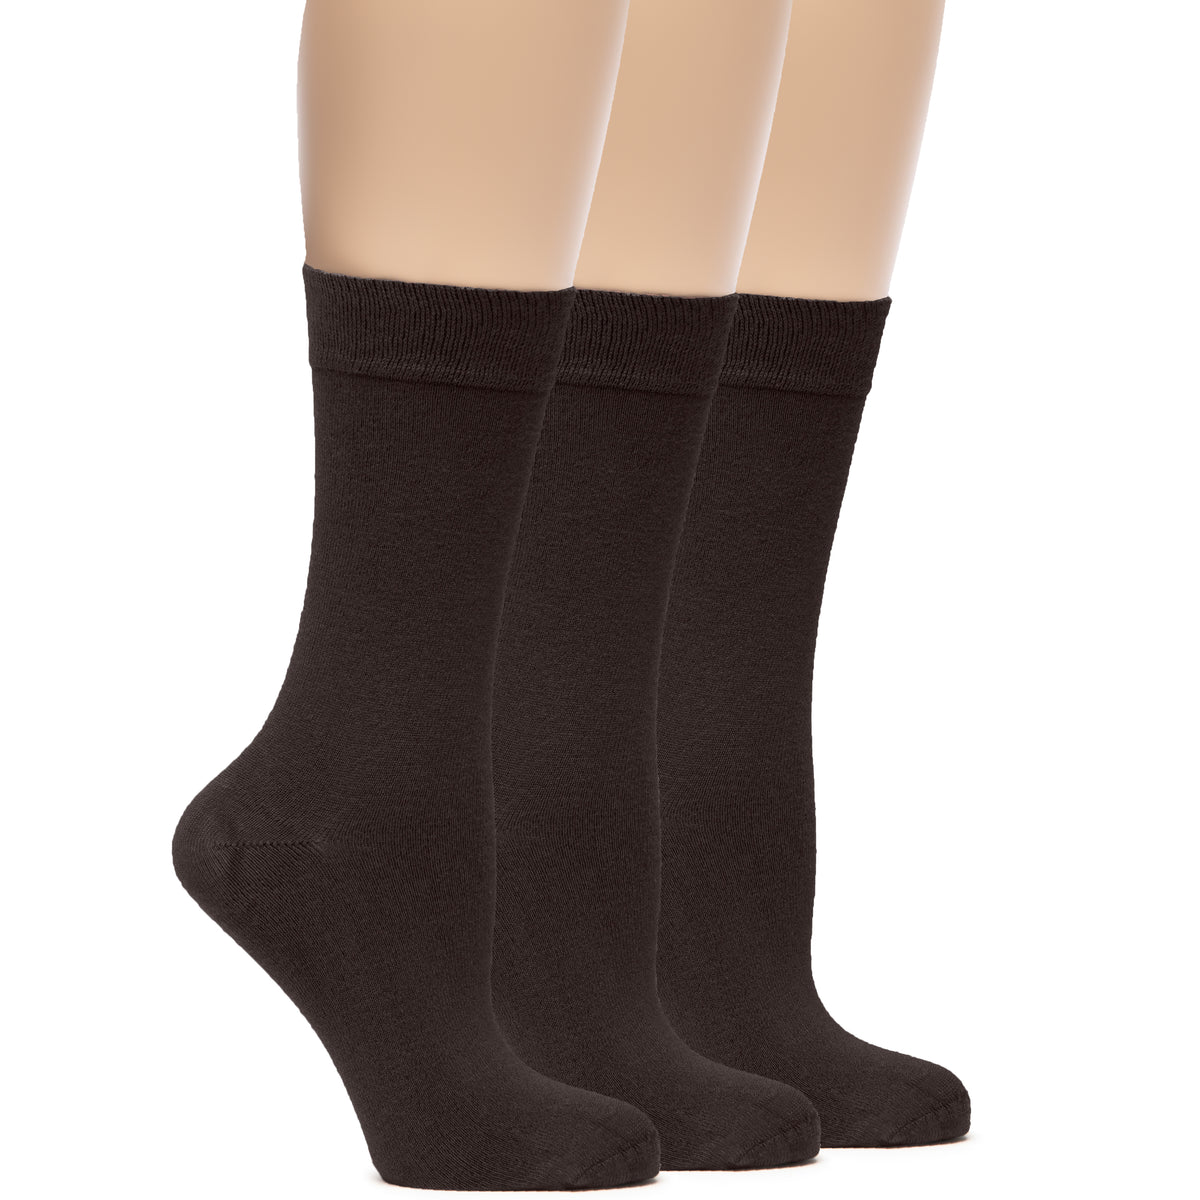 On display, a mannequin dons three brown Women's Bamboo Crew Socks, ideal for any occasion.